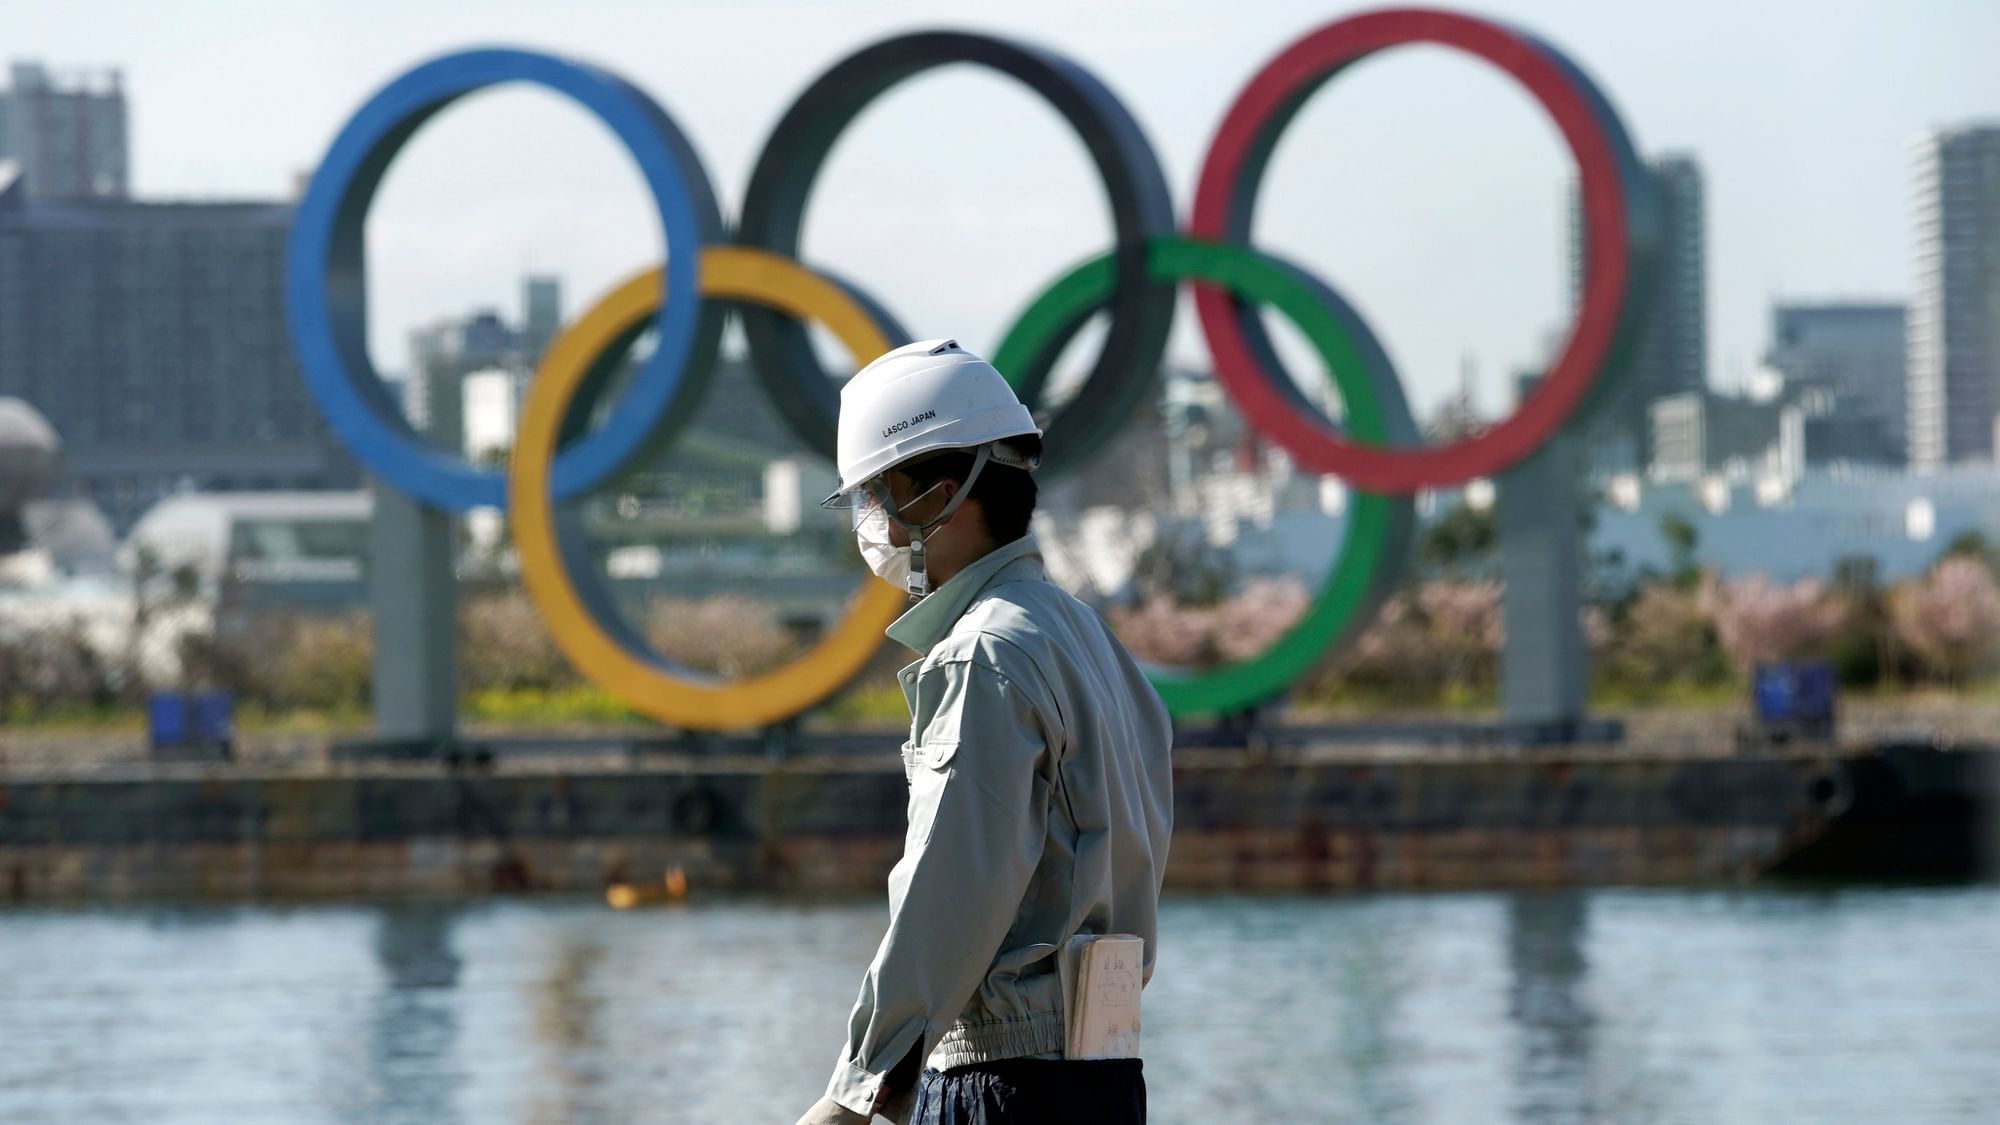 The 81-page “Home City Contract” was signed in 2013 by the IOC, the city of Tokyo, and the Japanese Olympic Committee.